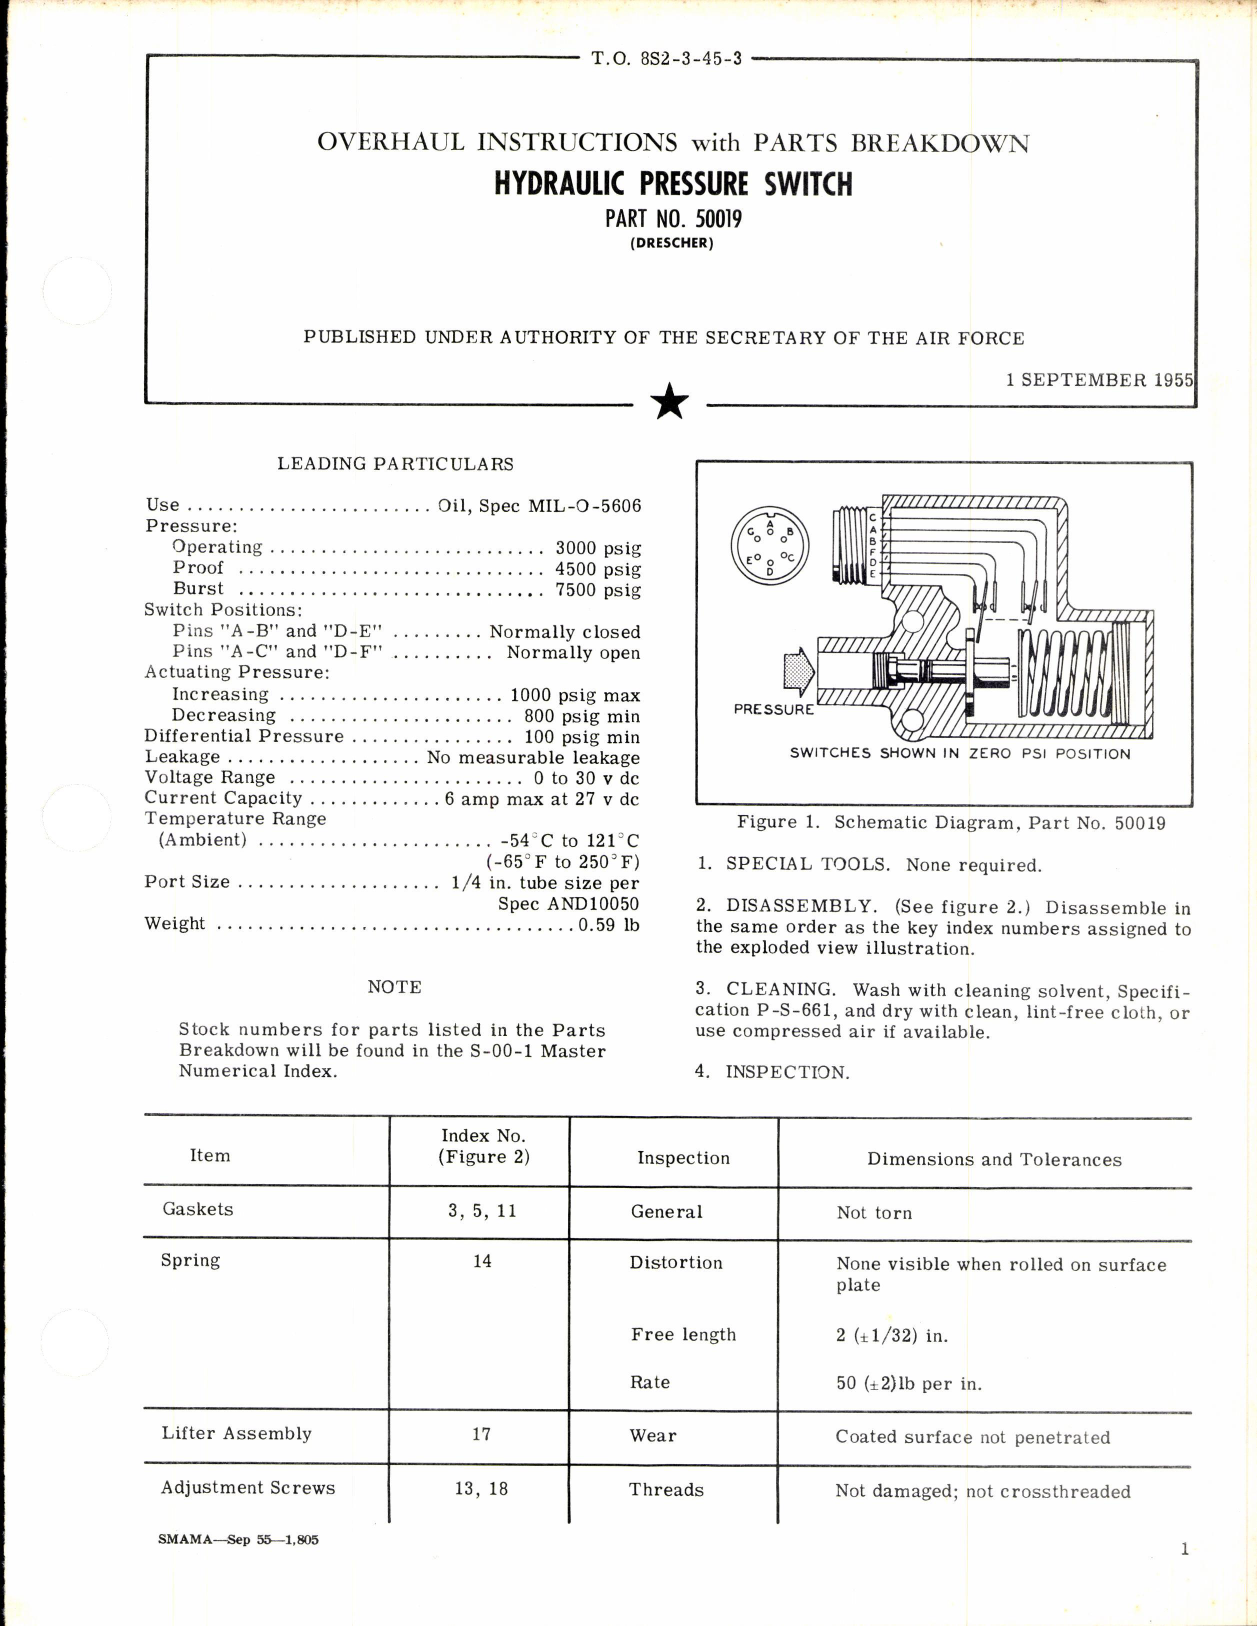 Sample page 1 from AirCorps Library document: Hydraulic Pressure Switch Part No 50019